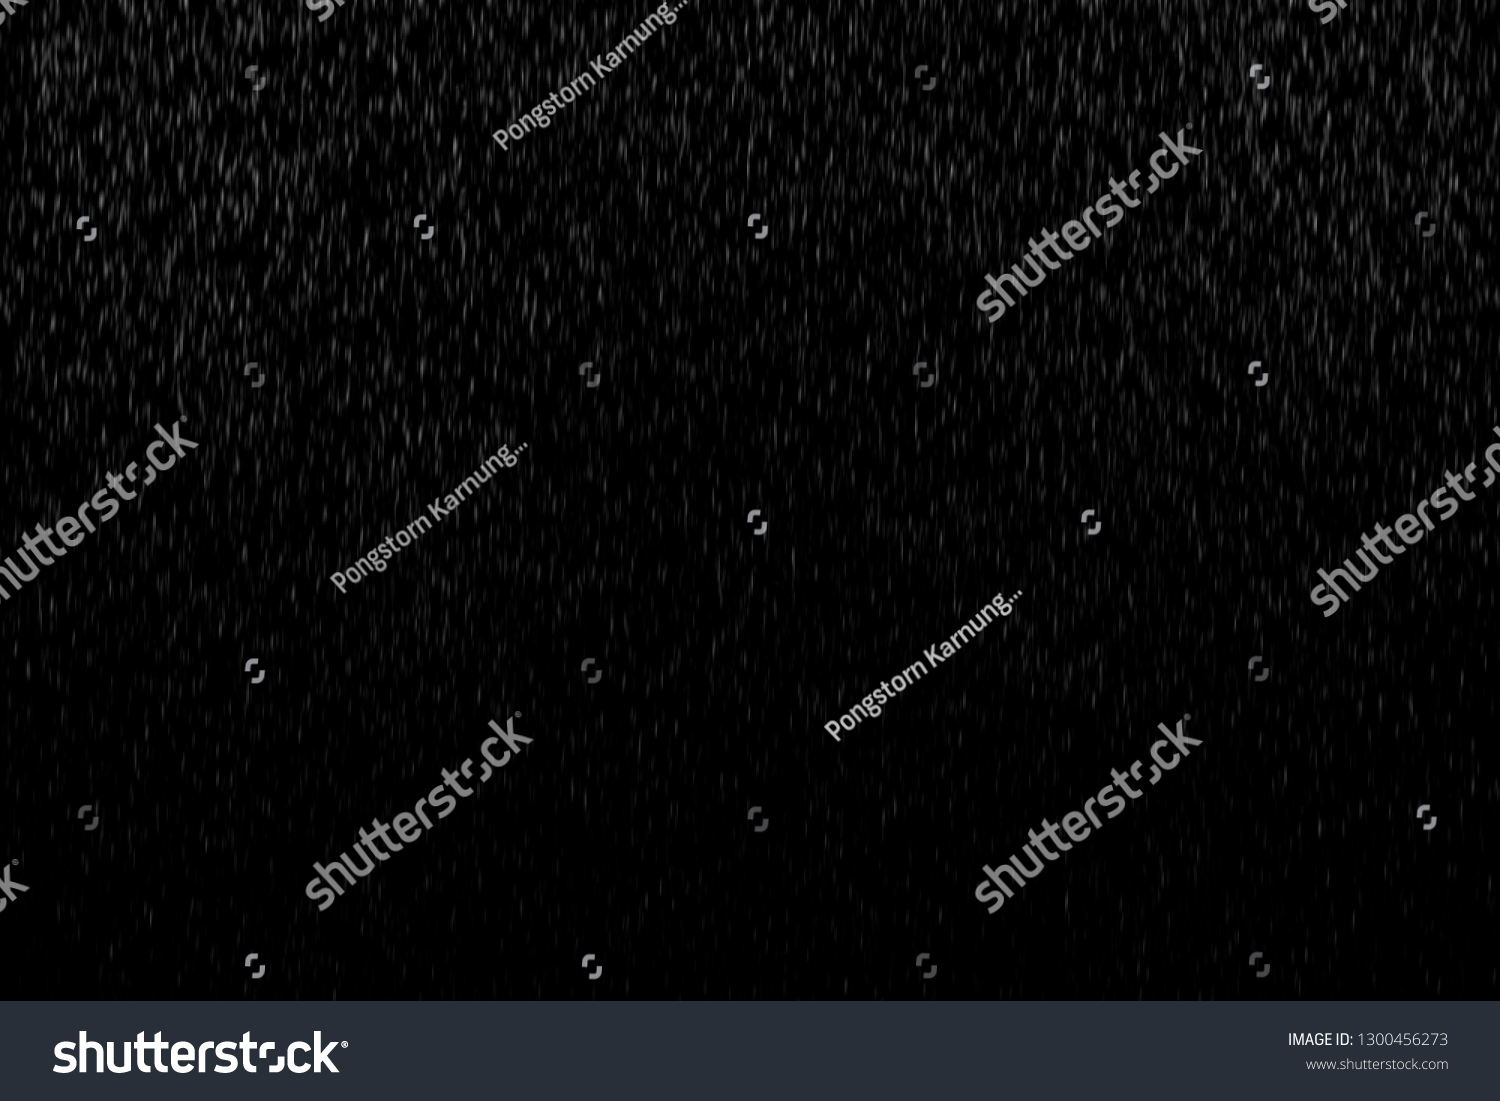 Abstract splashes of Rain and Snow Overlay Freeze motion of white particles on black background #1300456273